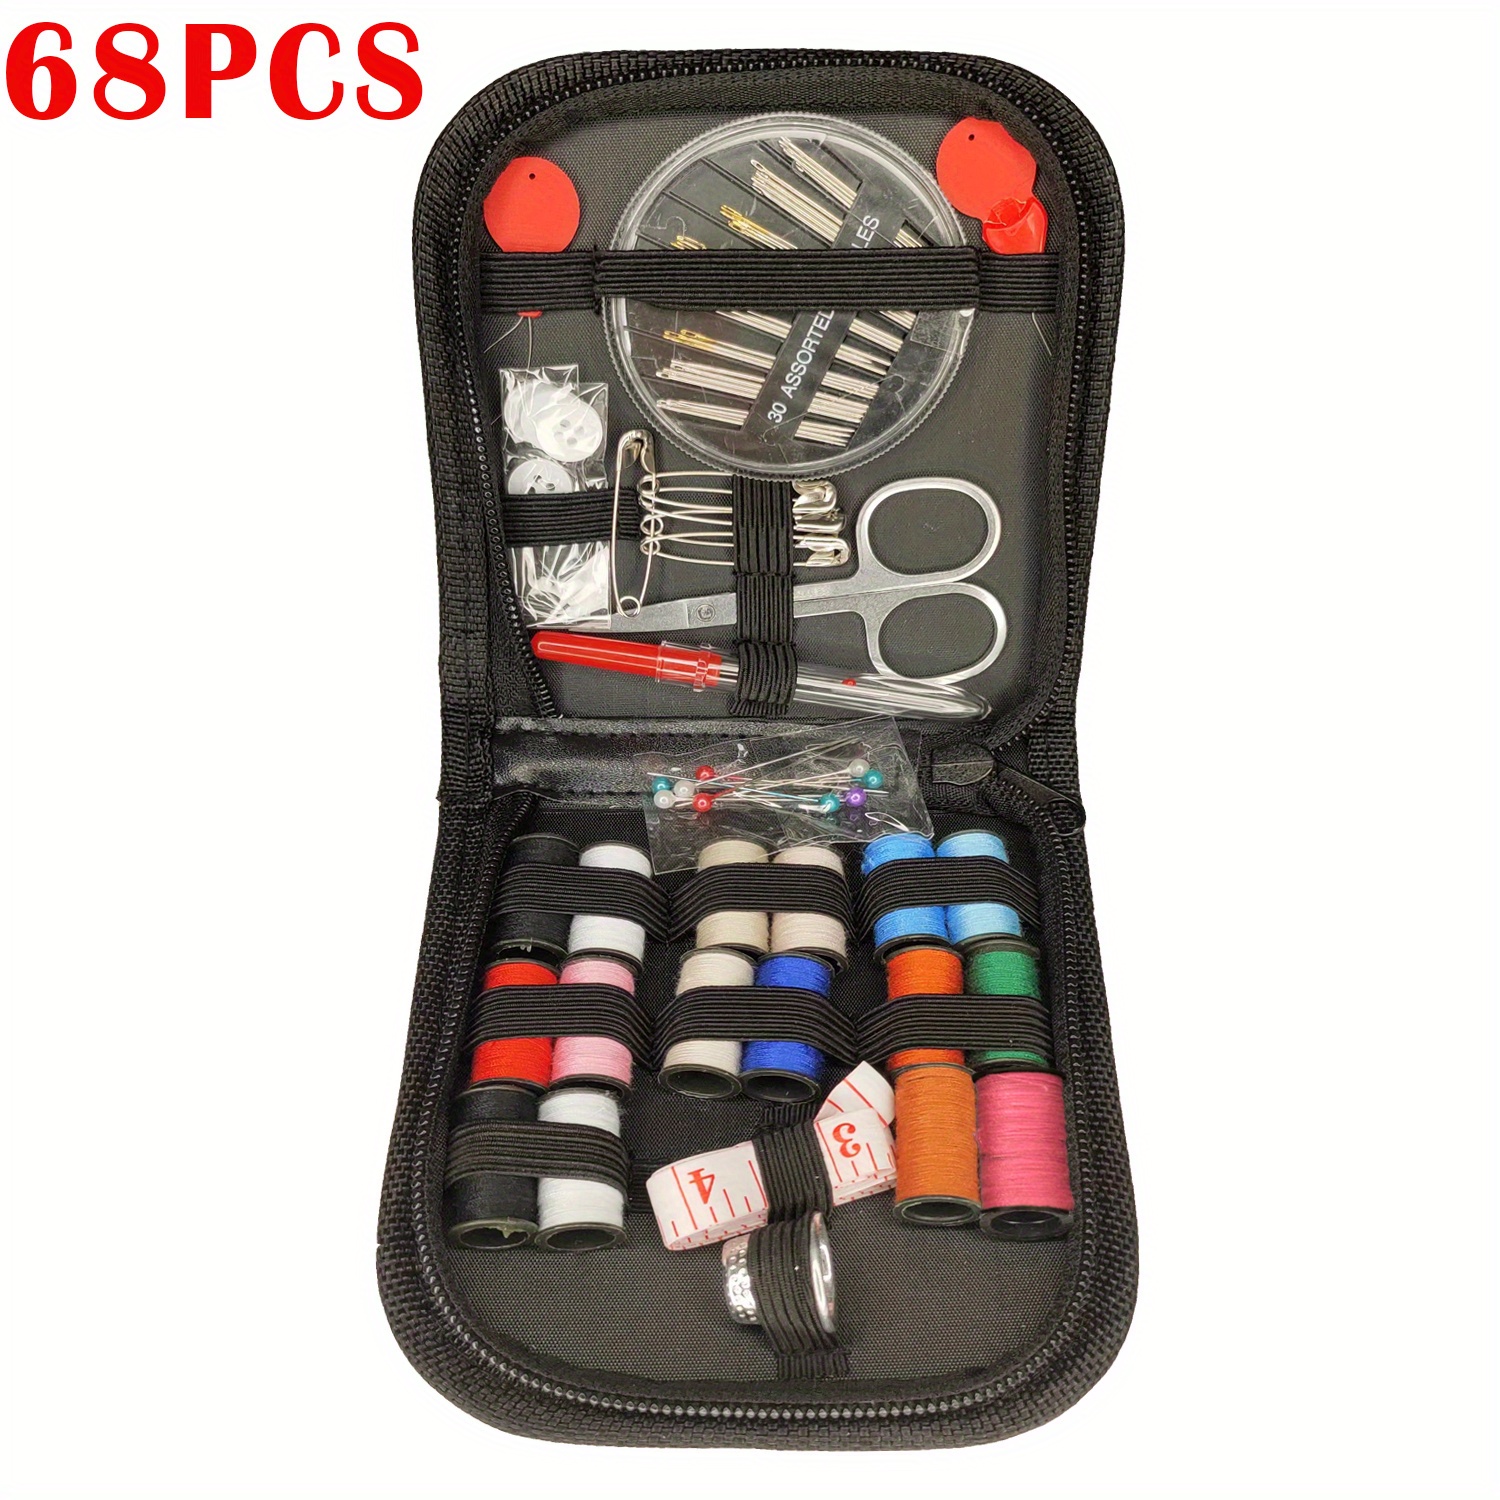  Mini Travel Sewing Kit, AUERVO DIY Premium Sewing  Supplies,Basic Sewing kit for Adults,Beginners,Home,Emergency Filled with  Repair kit and Sewing Needles,Thread,Scissors,Thimble,Tape Measure etc